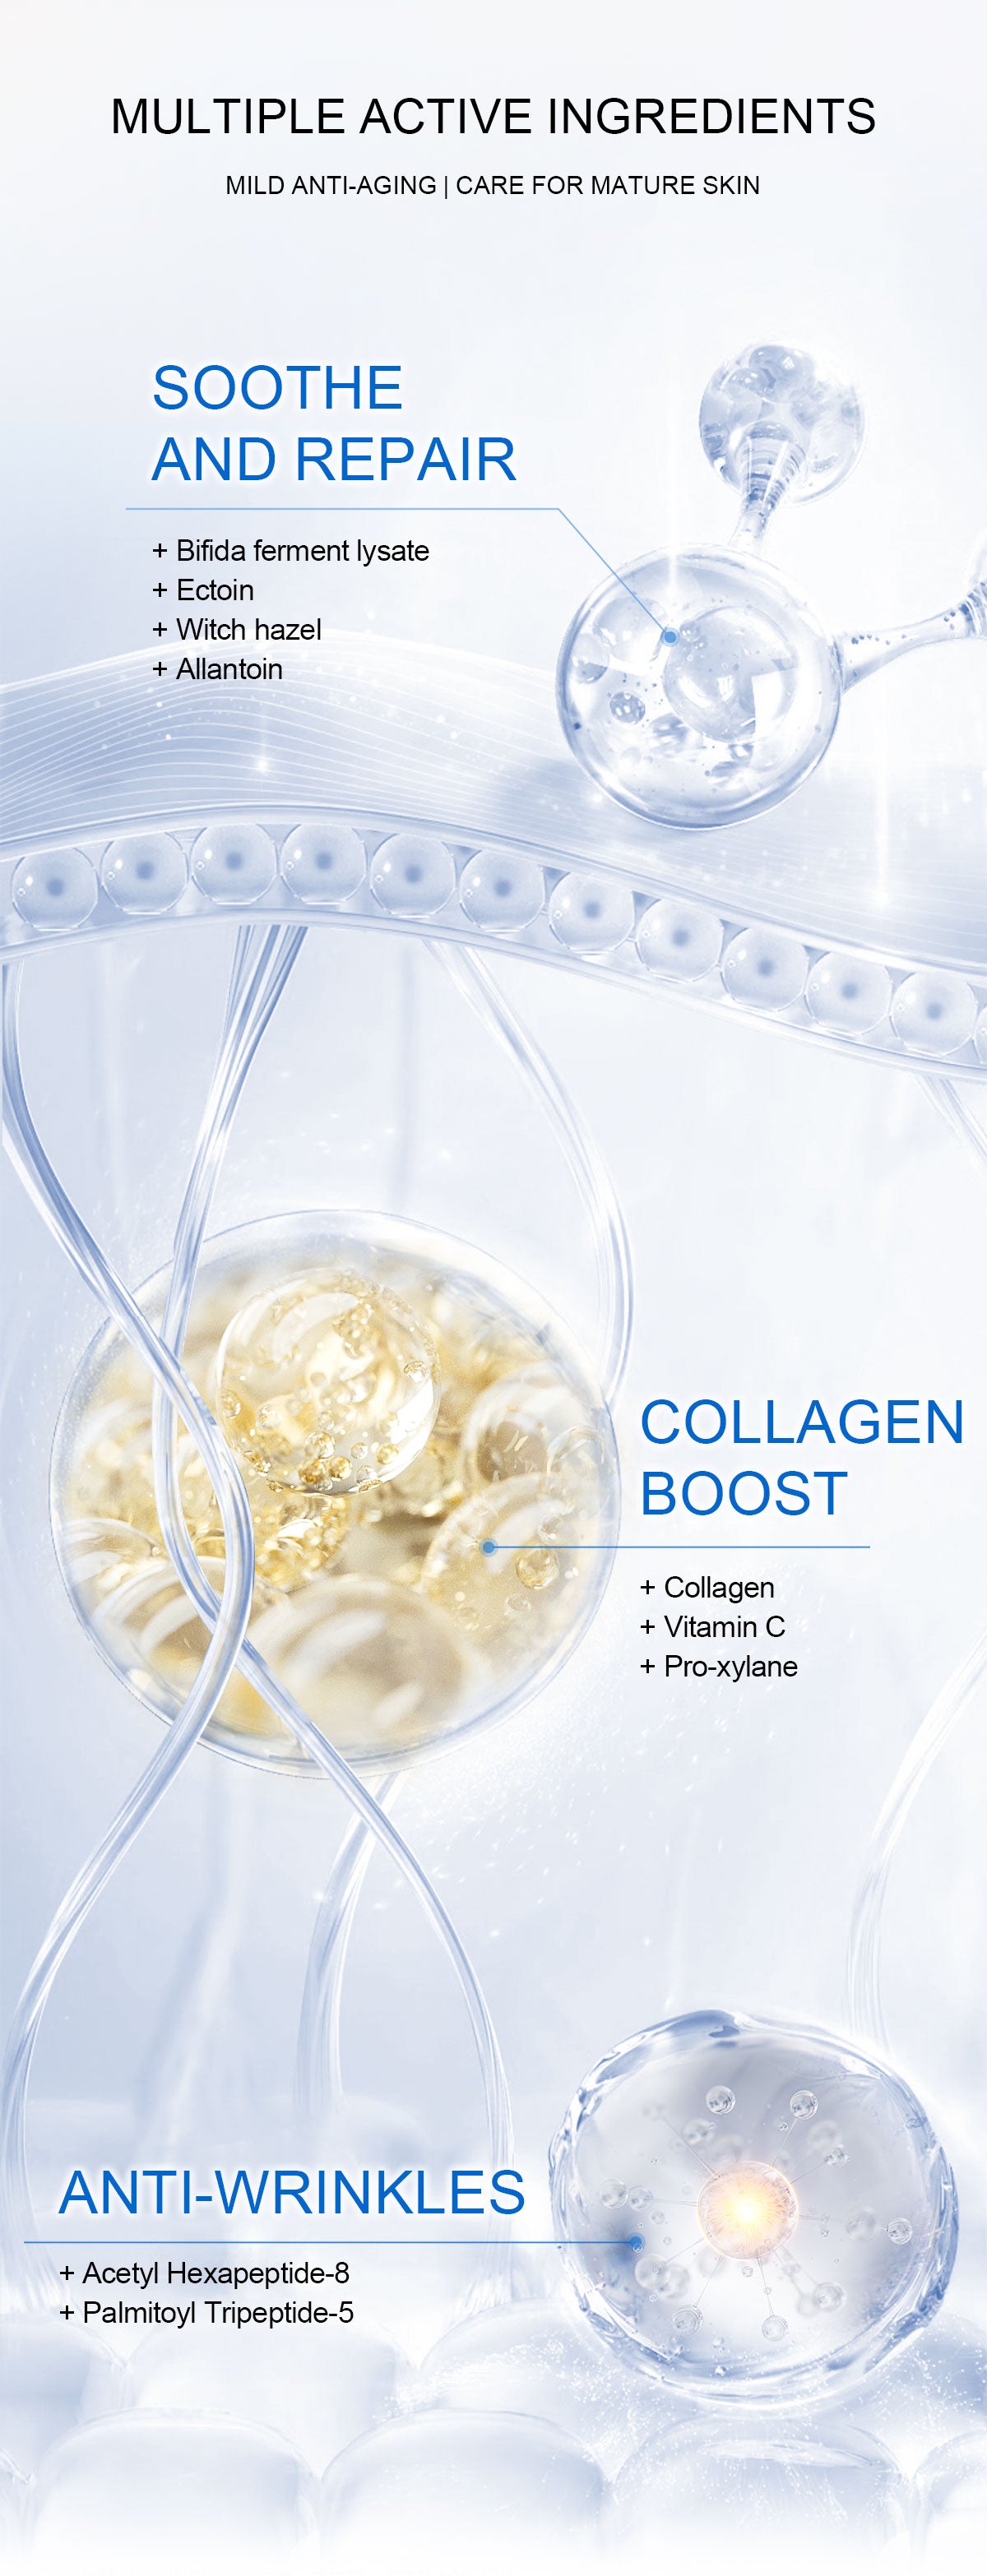 Private Label Best Collagen Peptide Serum For Skin Firming